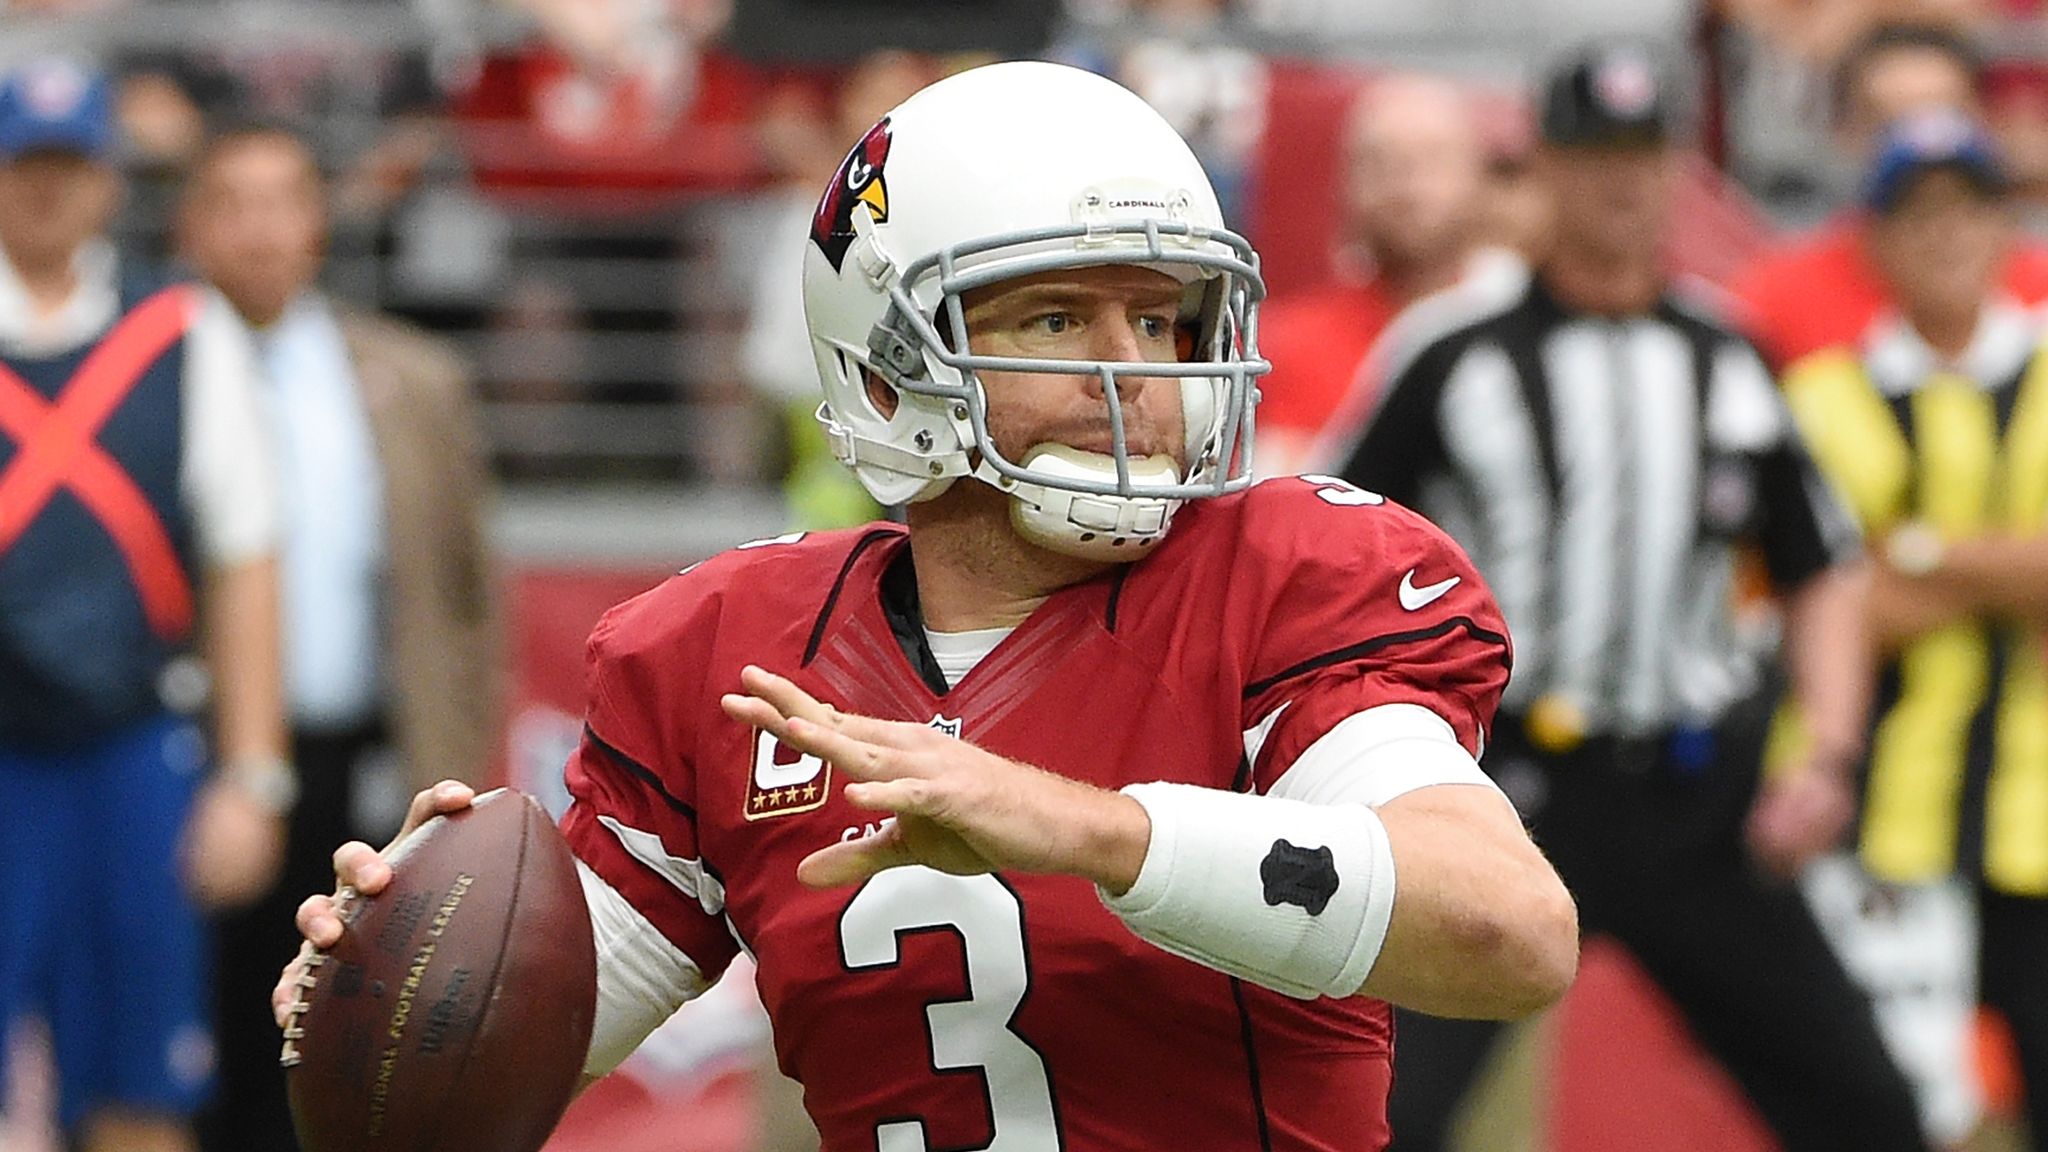 Report: Carson Palmer, Larry Fitzgerald both contemplating retirement